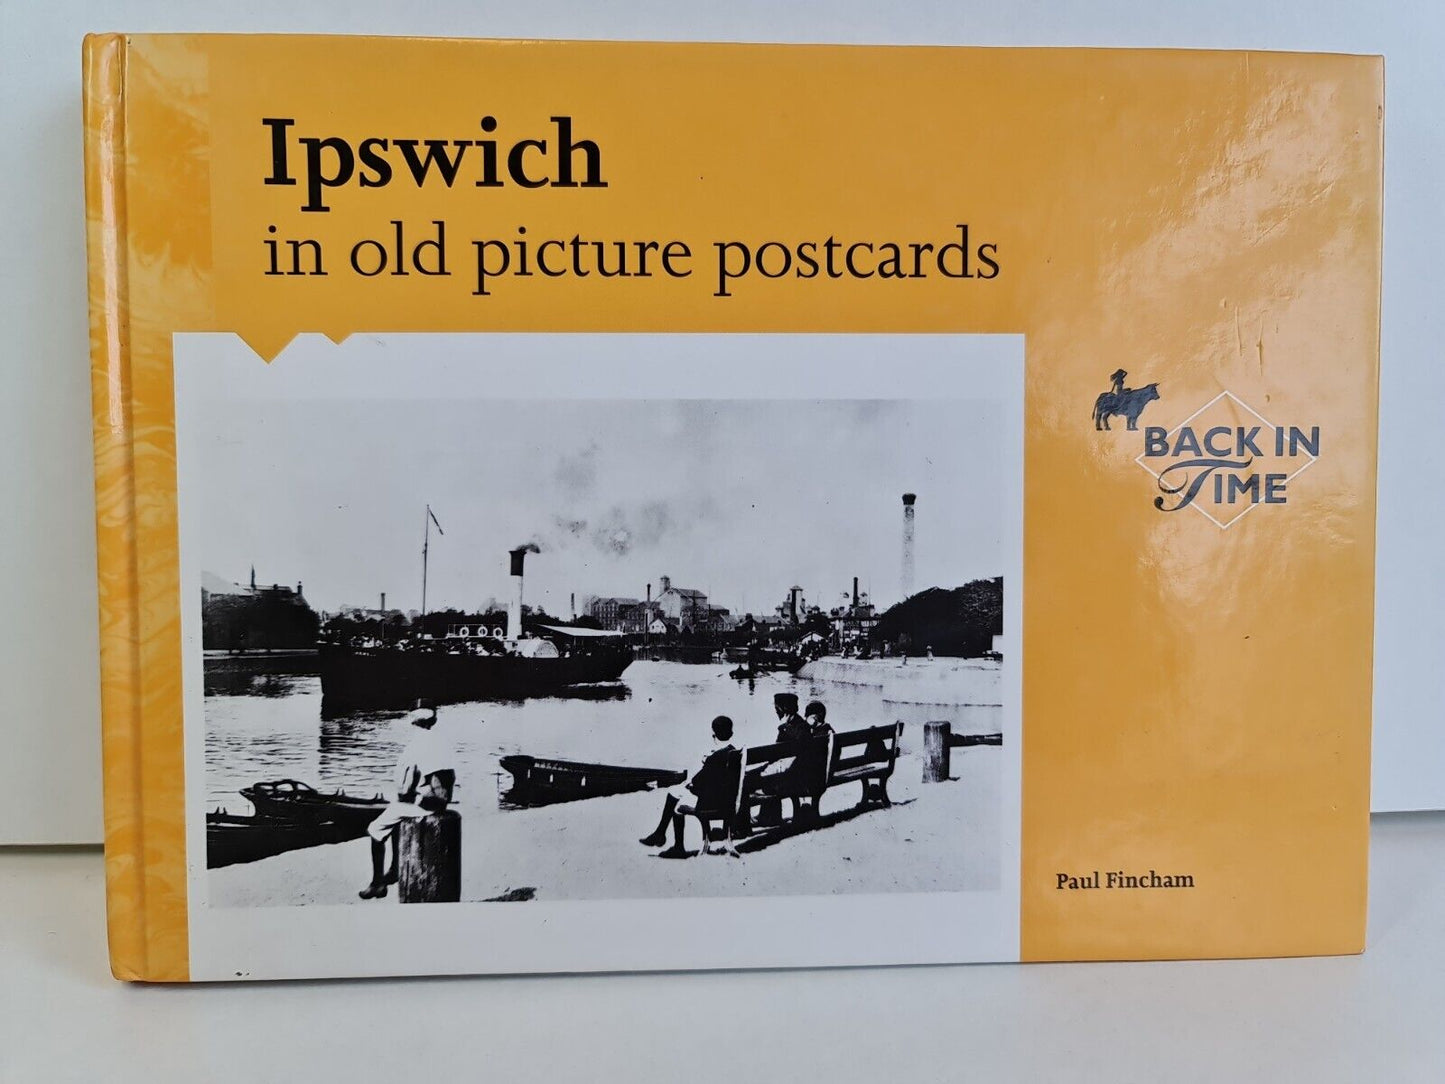 Ipswich in Old Picture Postcards by Paul Fincham (1999)